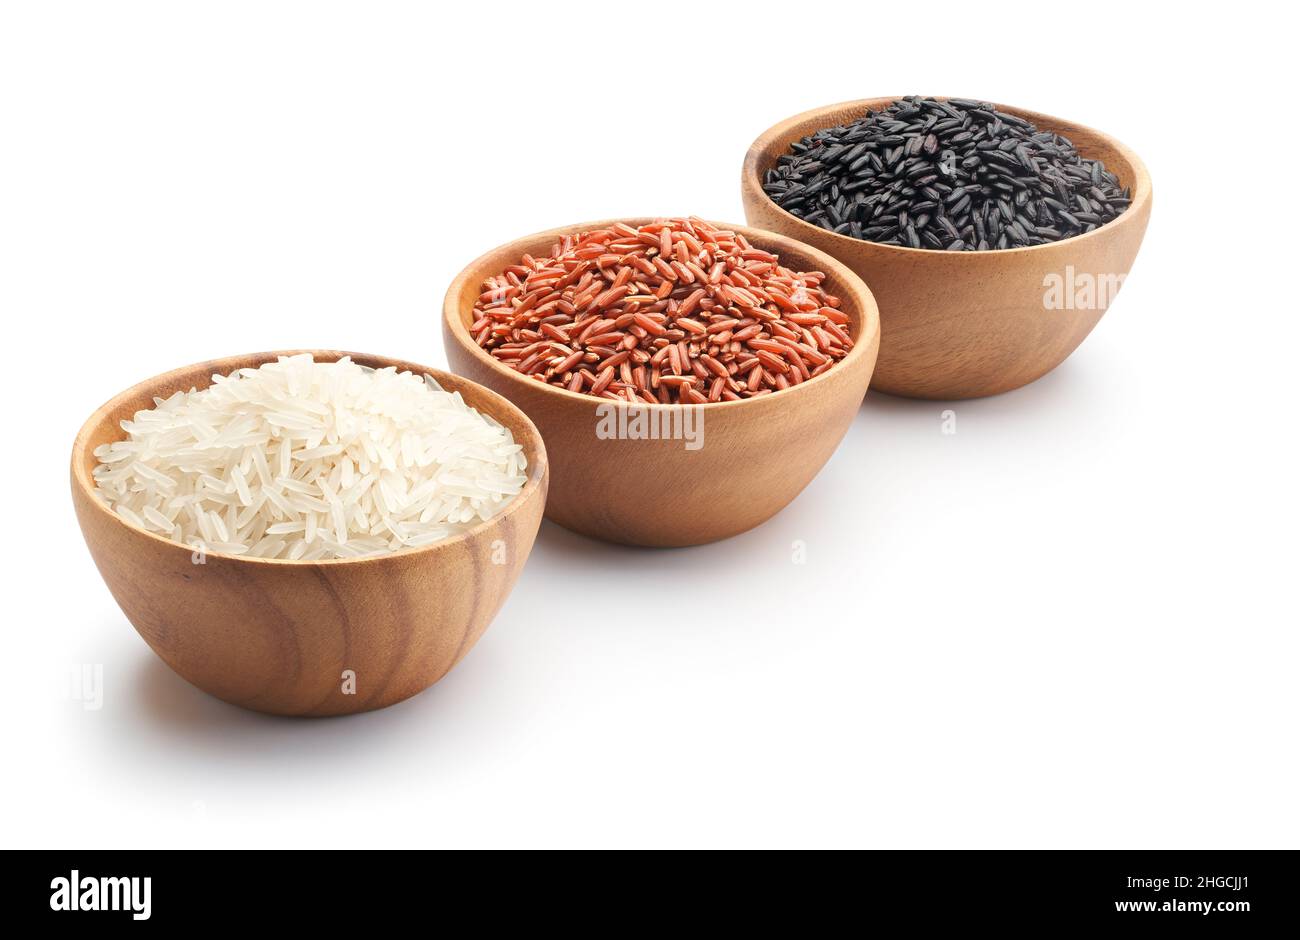 Three types of rice in bowls - basmati rice, red rice and black rice - clipping path included Stock Photo